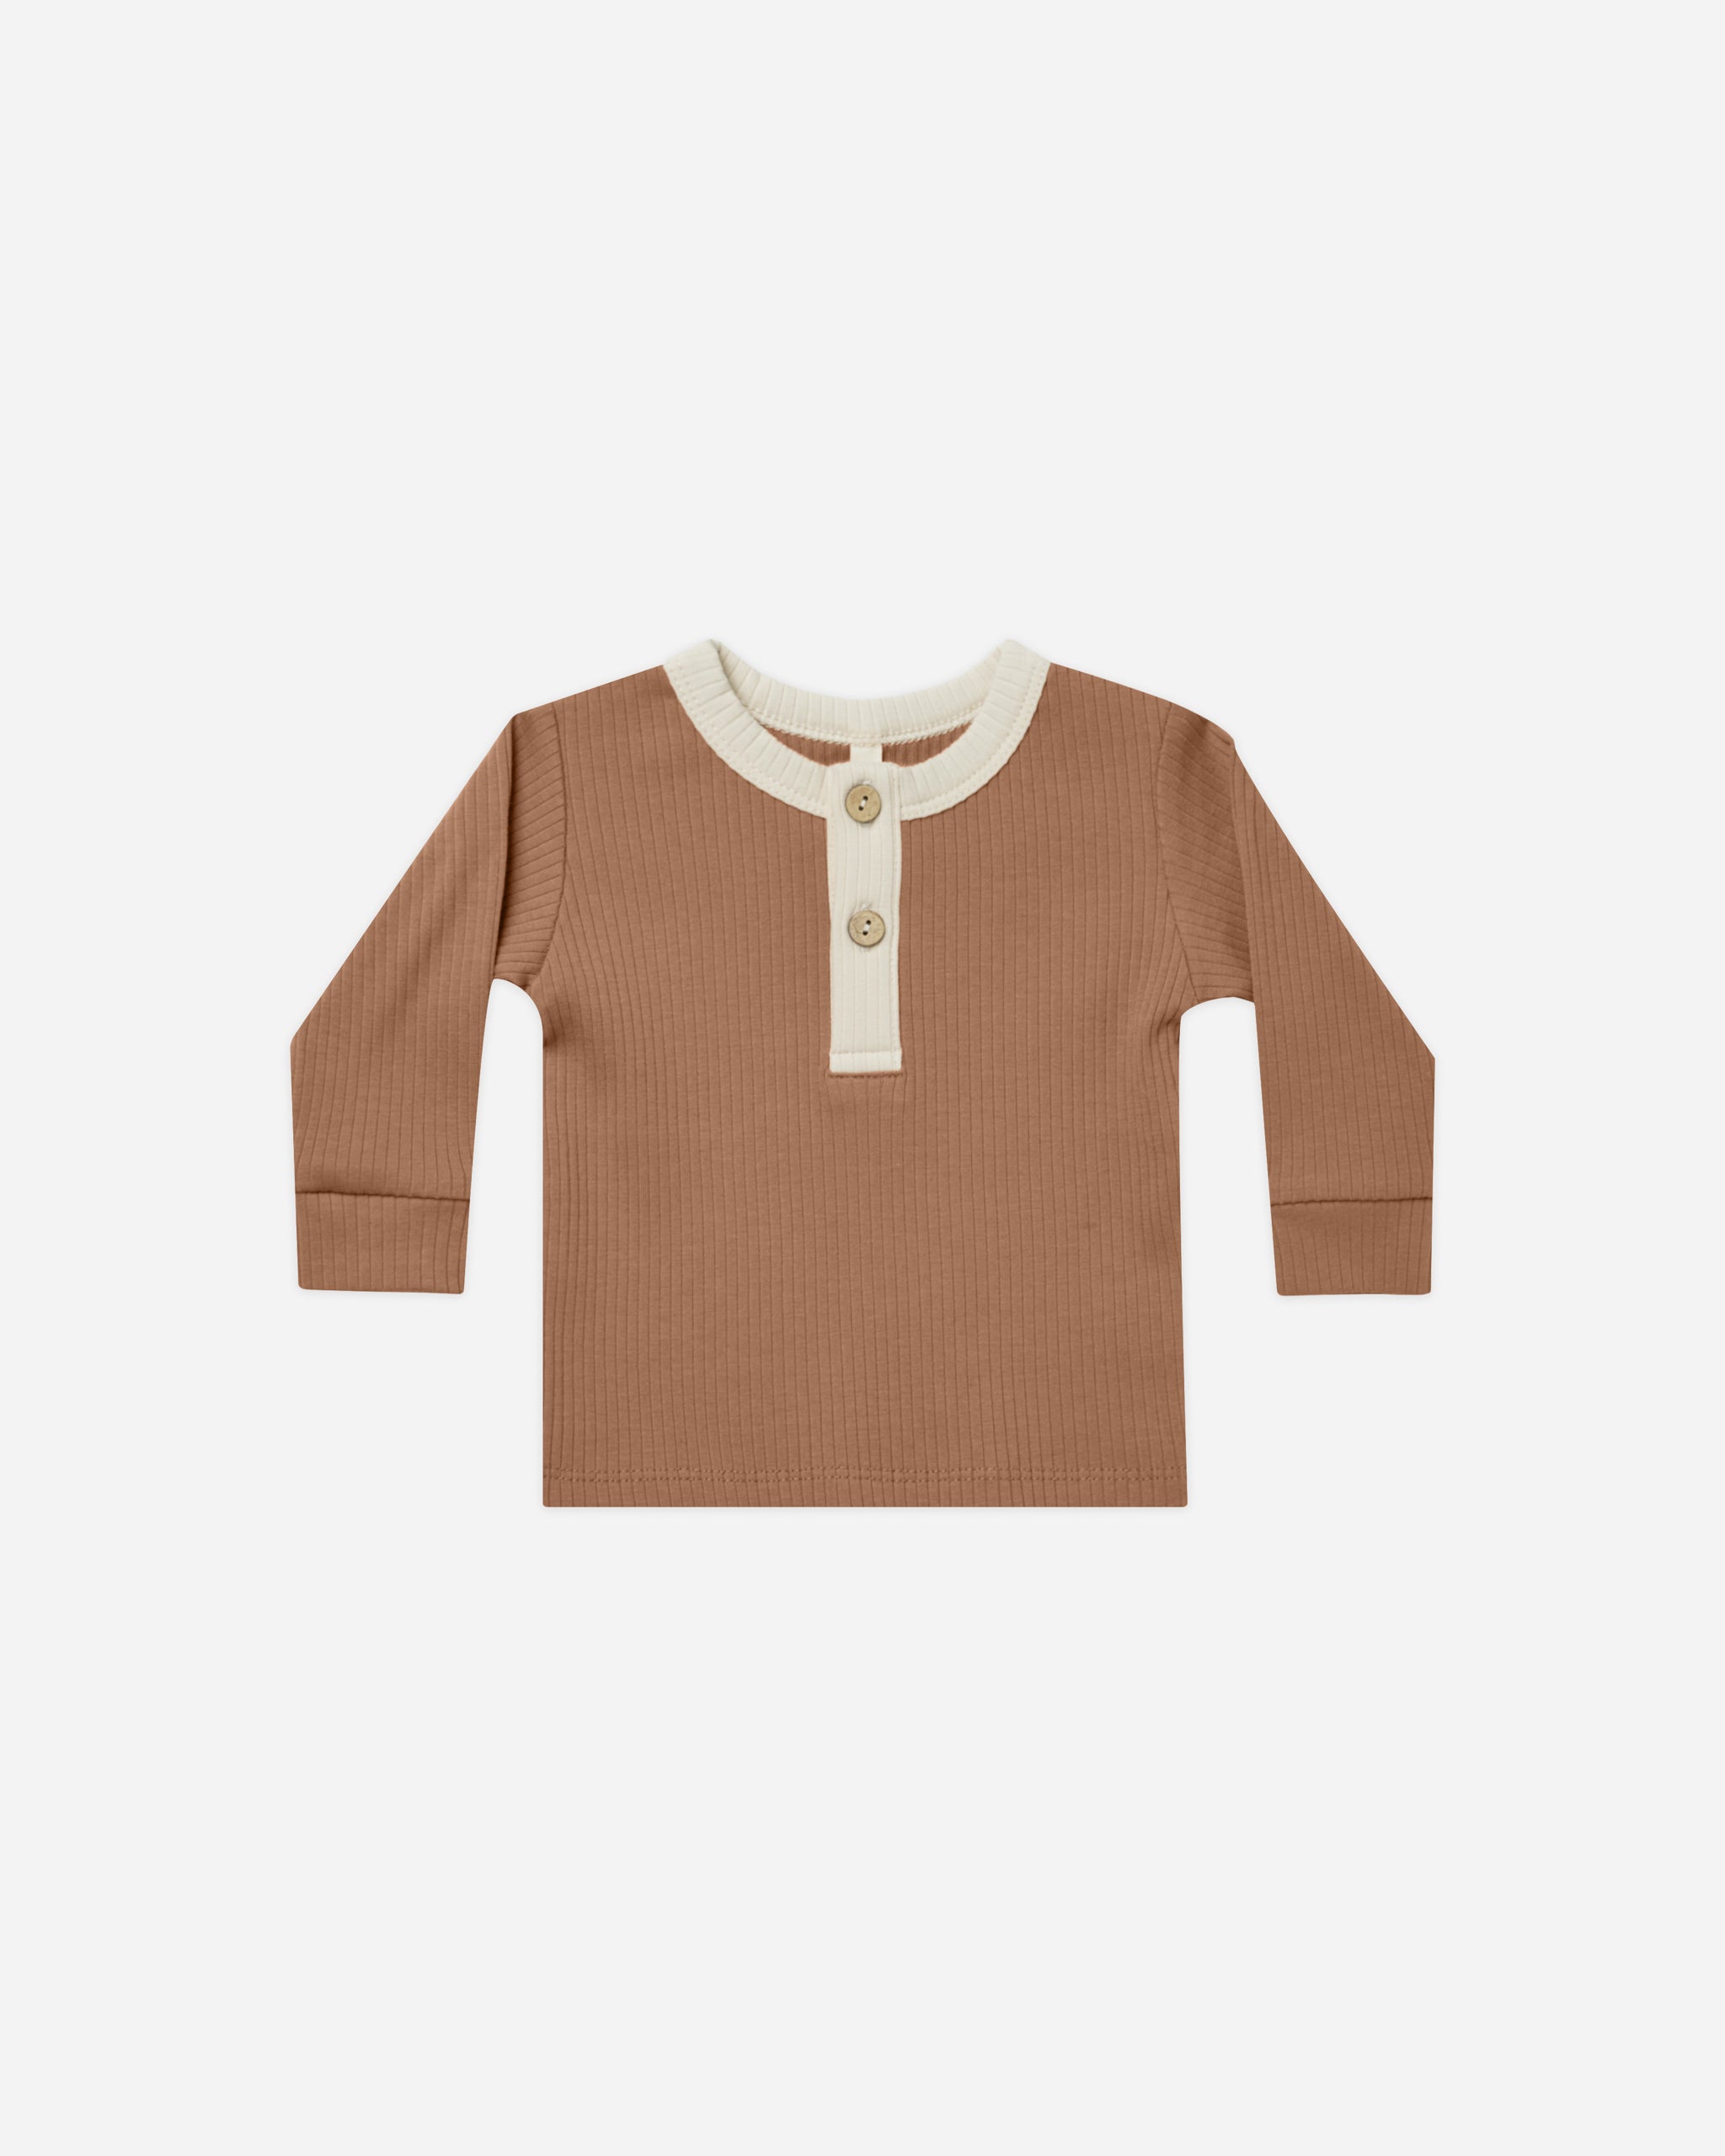 Ribbed Long Sleeve Henley || Cinnamon - Rylee + Cru | Kids Clothes | Trendy Baby Clothes | Modern Infant Outfits |